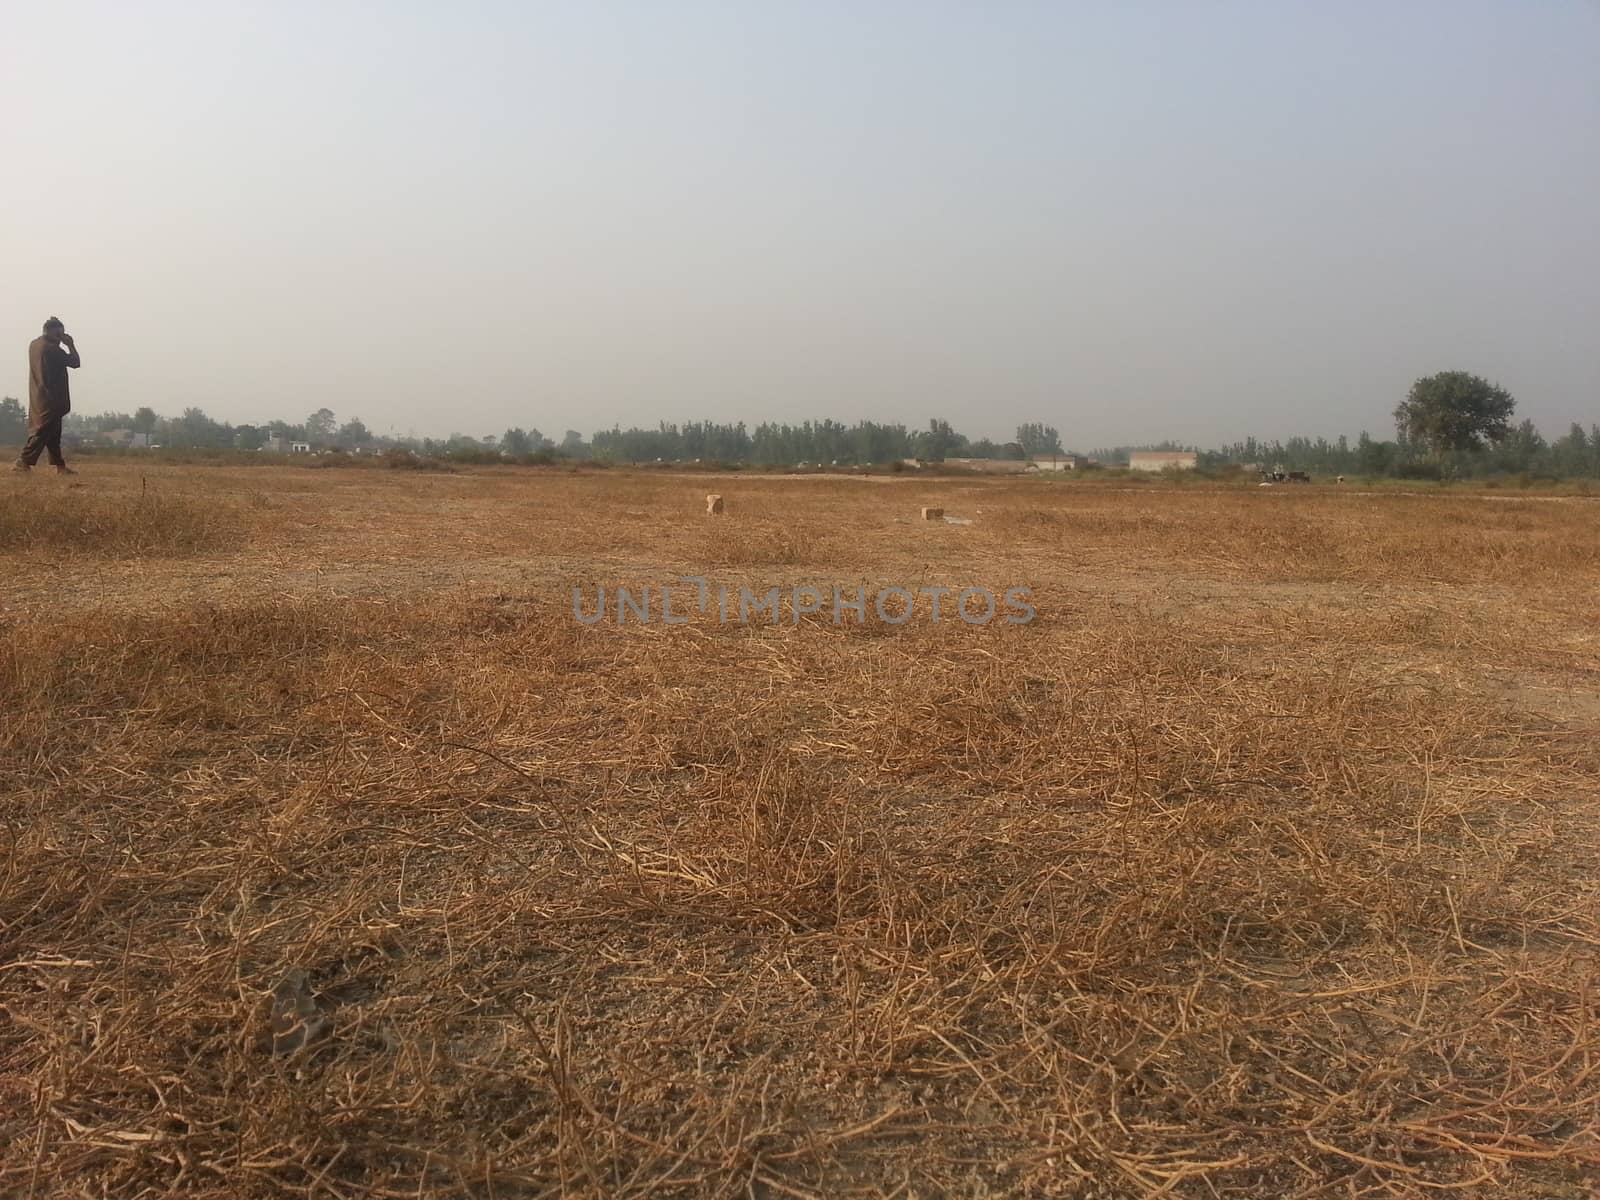 Arid brown grassland view of a rural land in hot weather on sunny day by Photochowk